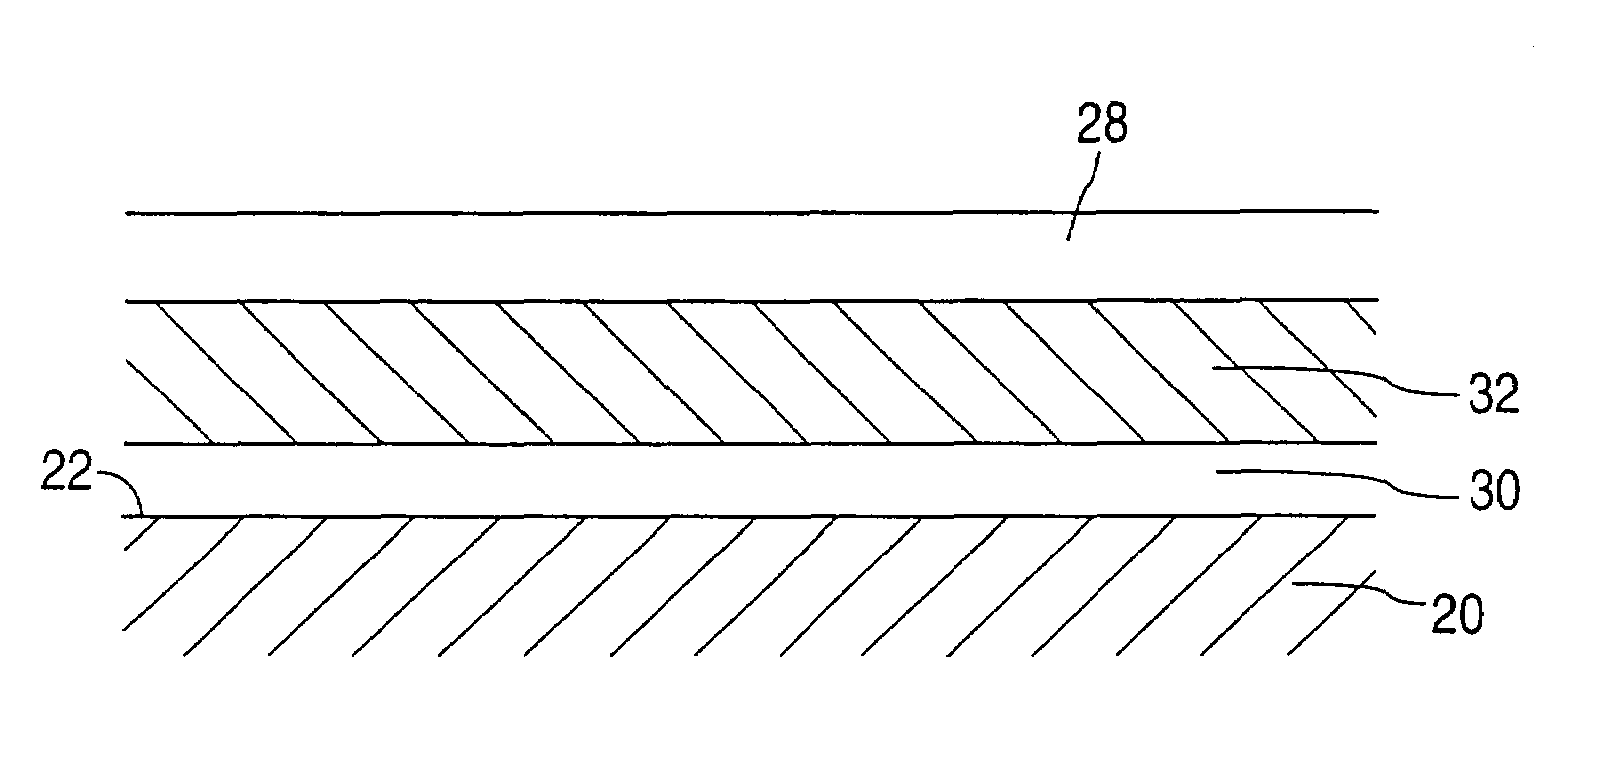 Rate-reducing membrane for release of an agent